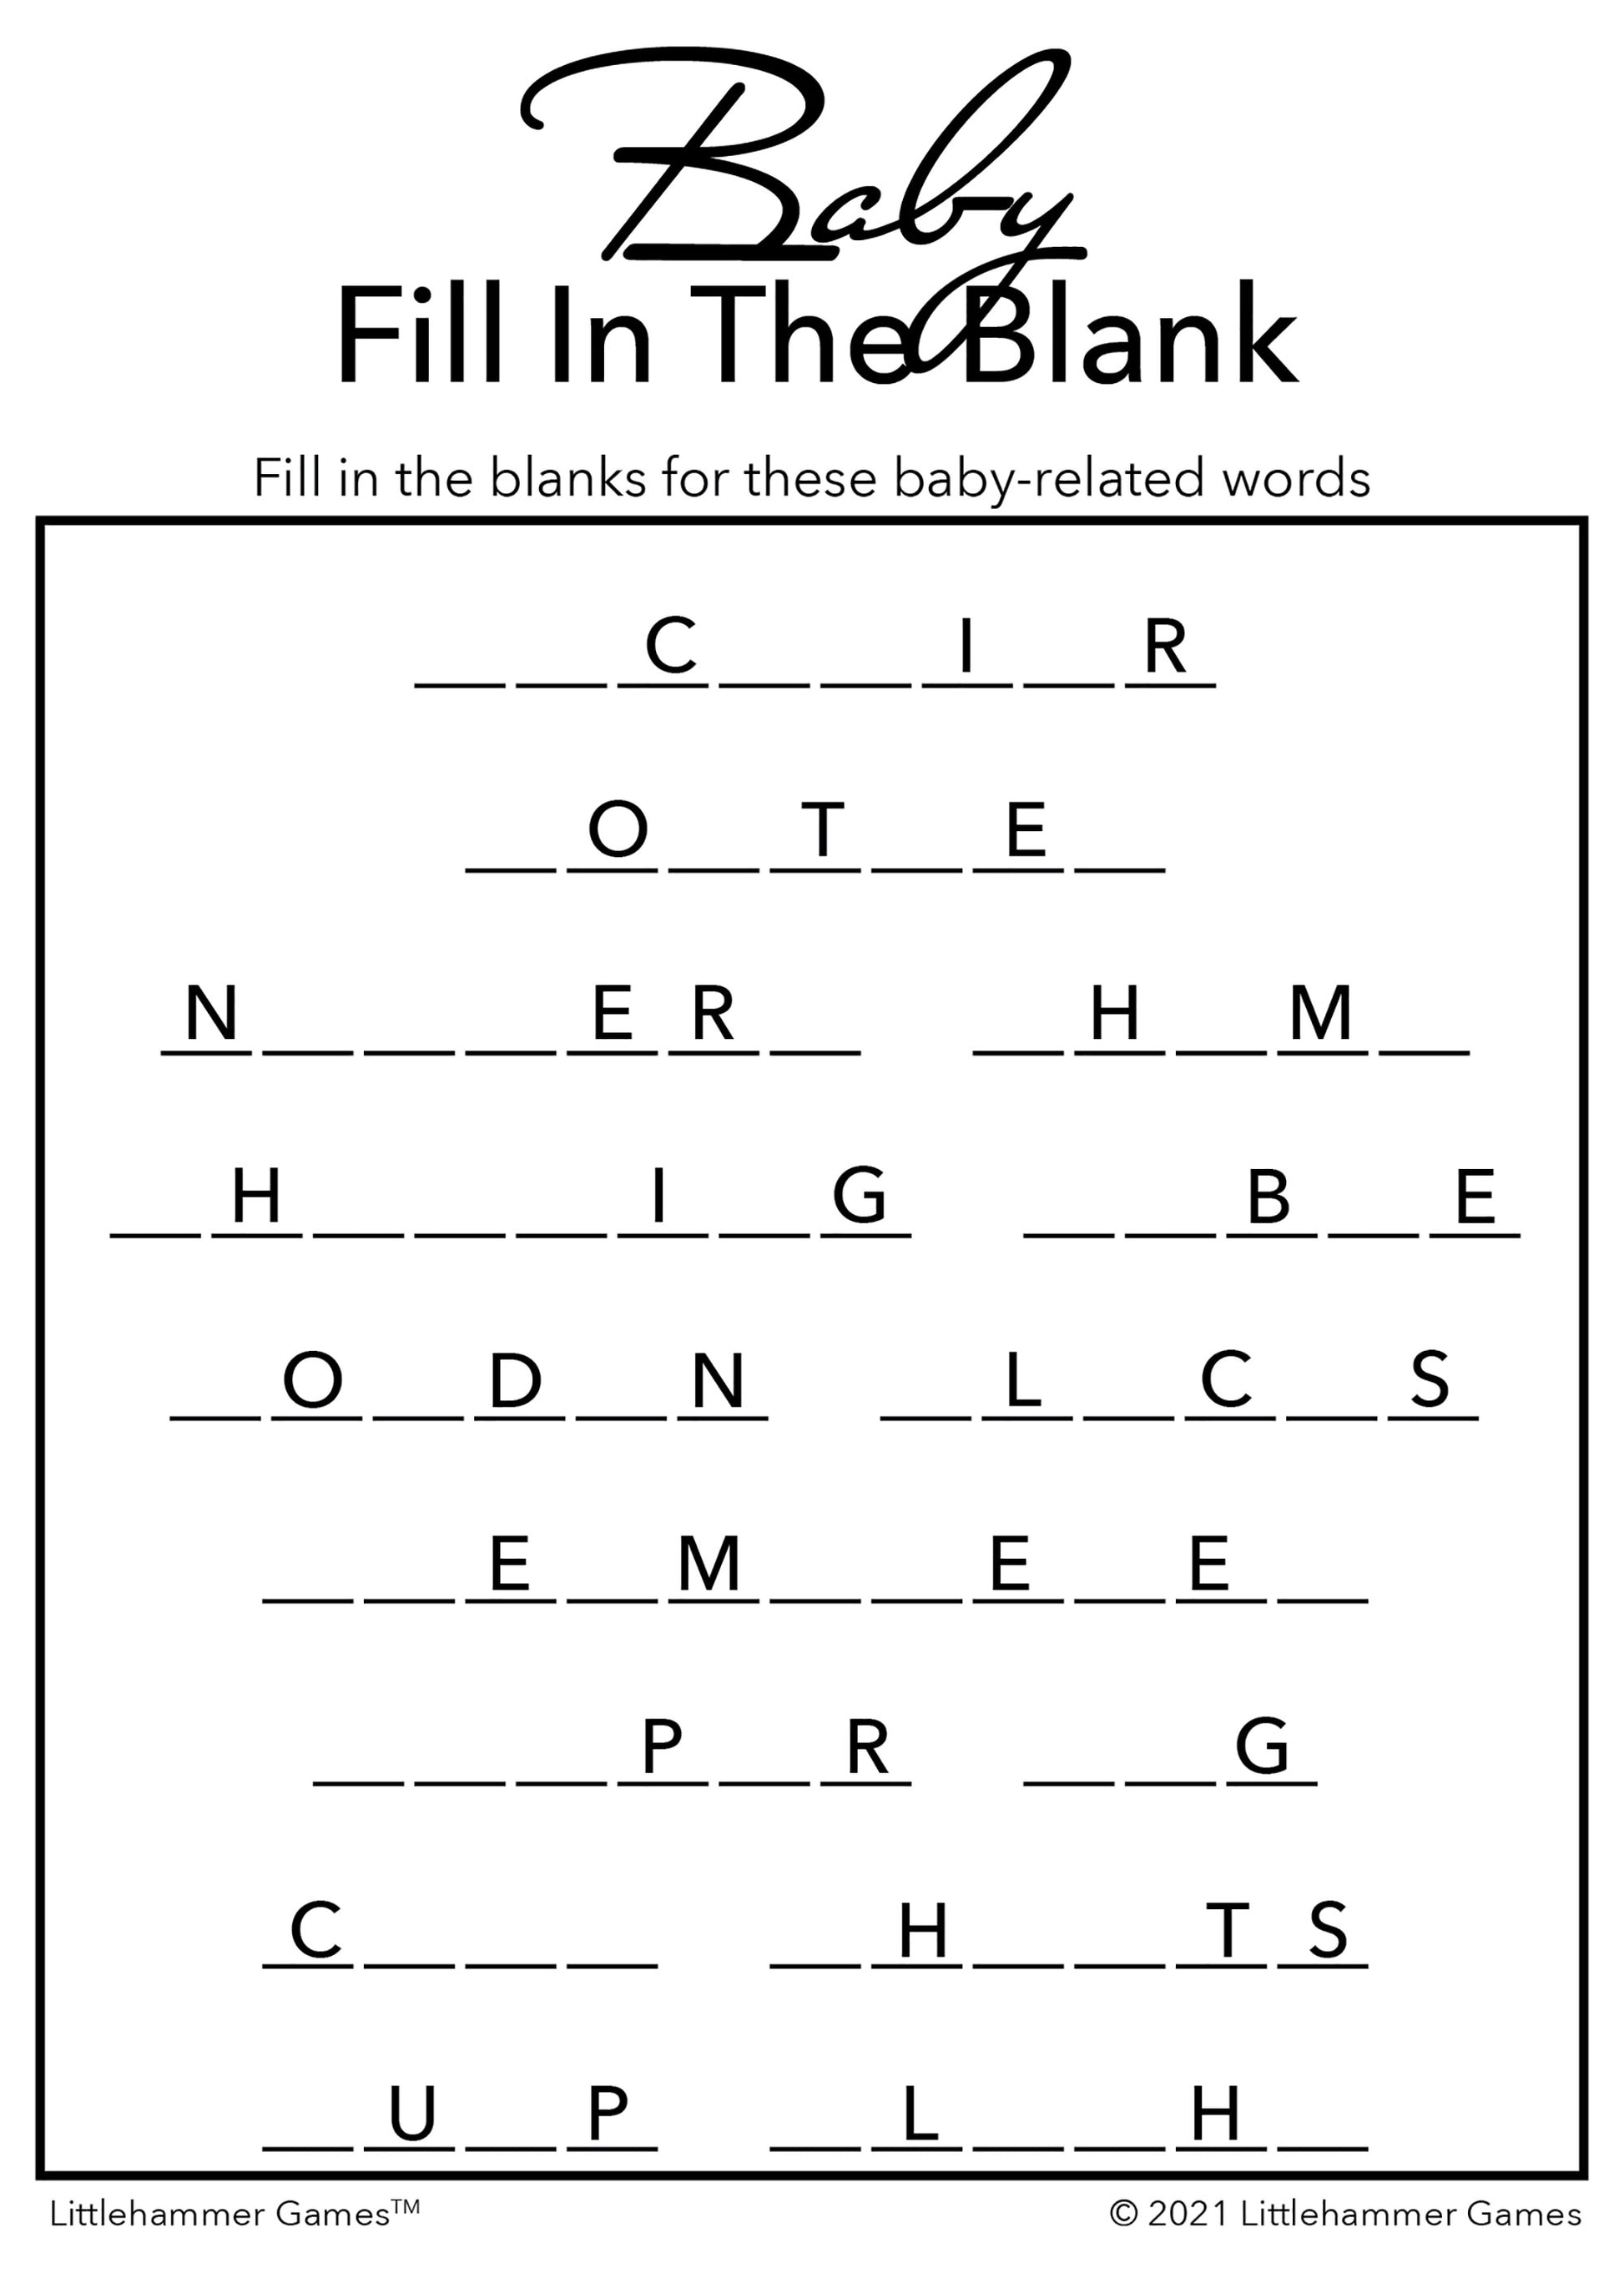 Baby Fill in the Blank game card with black text on a white background